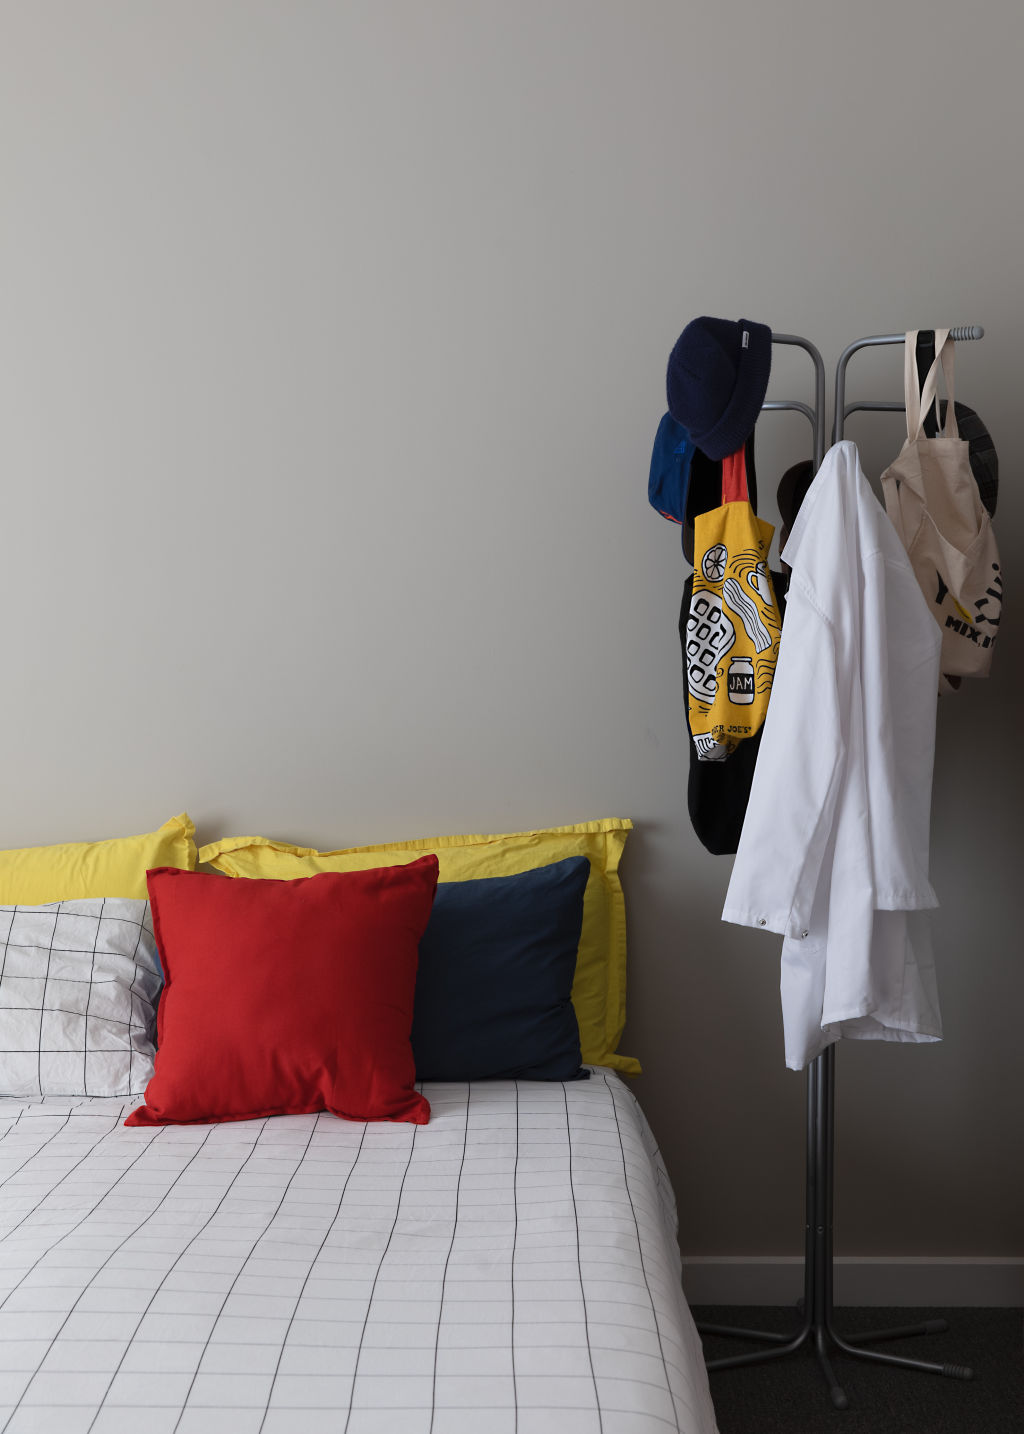 Ziggy’s room is inspired by '1980s Memphis Ikea'. Photo: Emma Byrnes